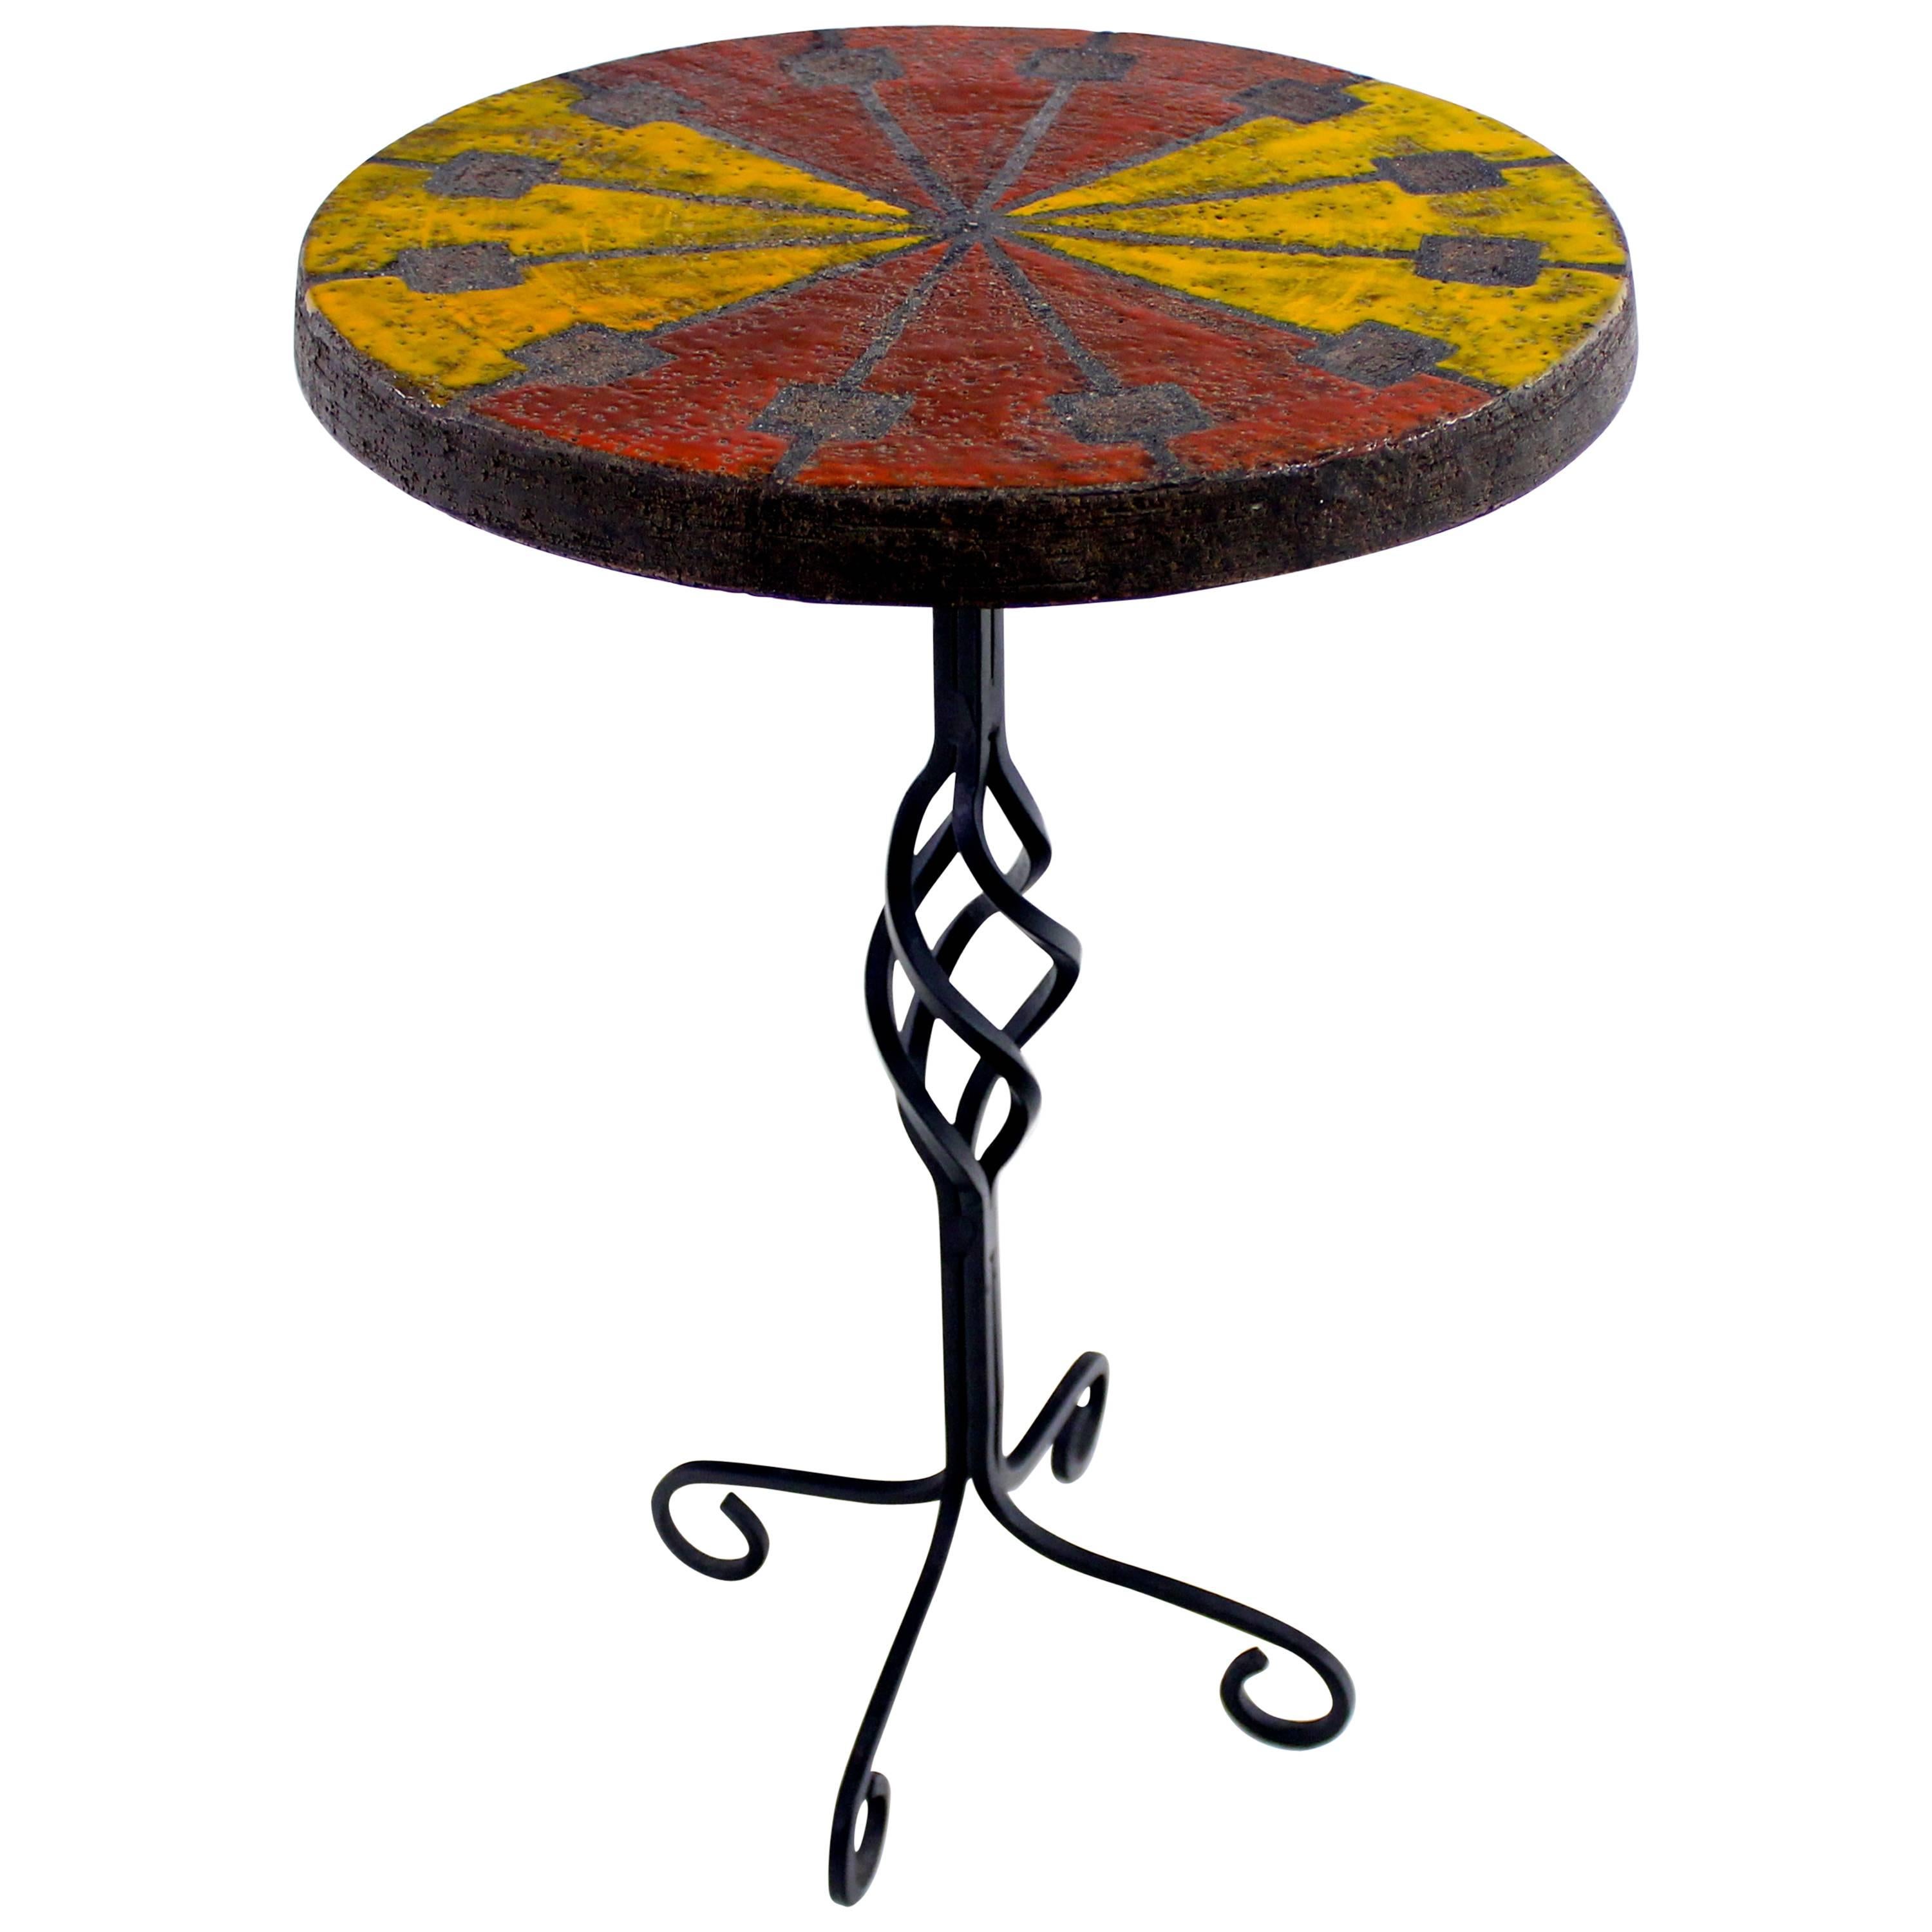 Italian Modern Wrought Iron and Ceramic Side Table by Raymor For Sale